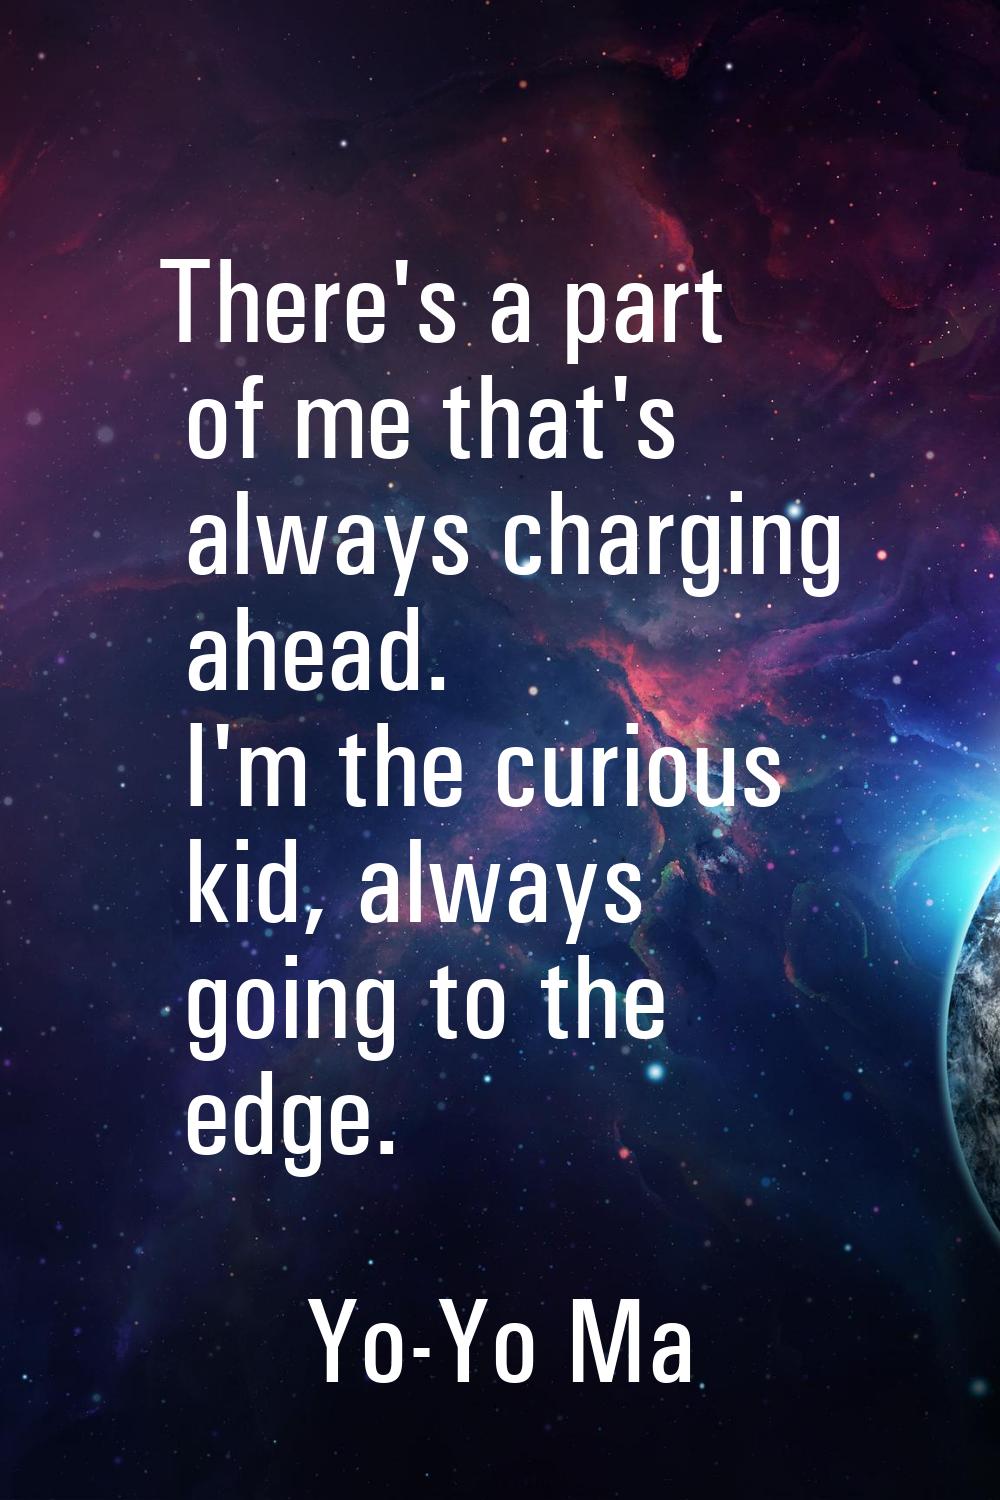 There's a part of me that's always charging ahead. I'm the curious kid, always going to the edge.